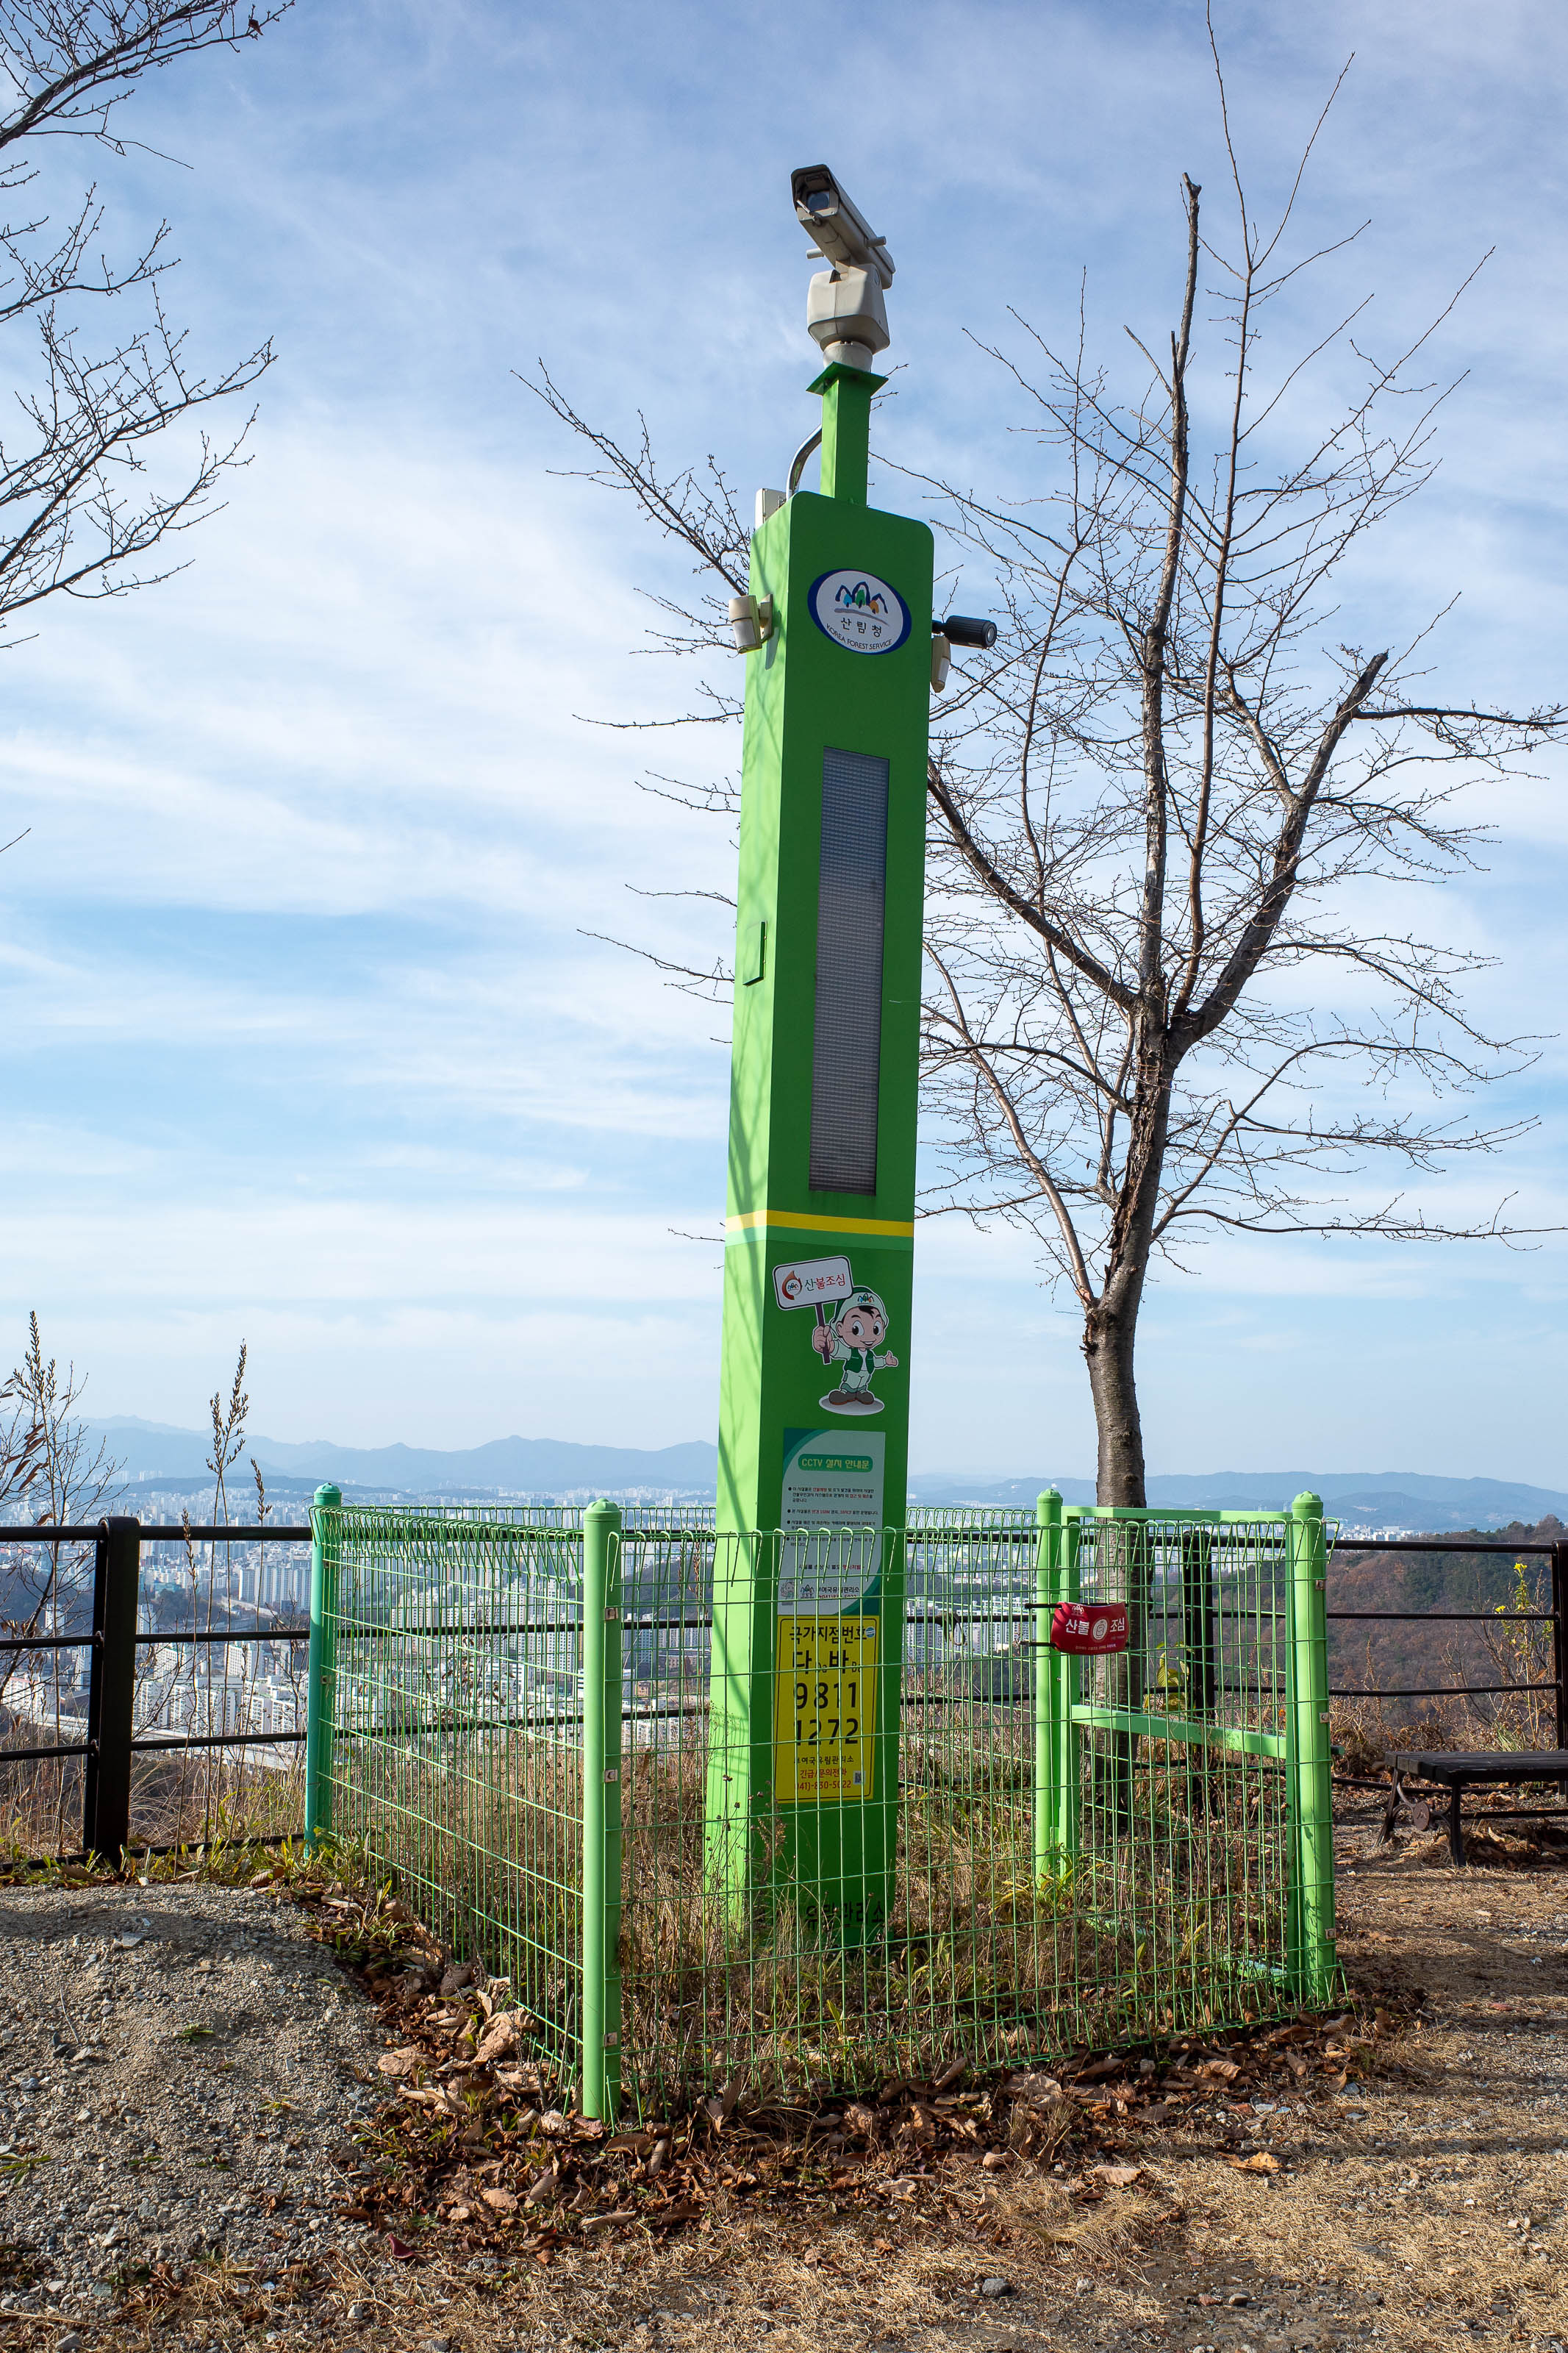 Korean-Hiking-Daejeon-Bomunsan - A remote forest fire detection robot. It speaks to you as you go past. I can neither confirm nor deny that I urinated on it.